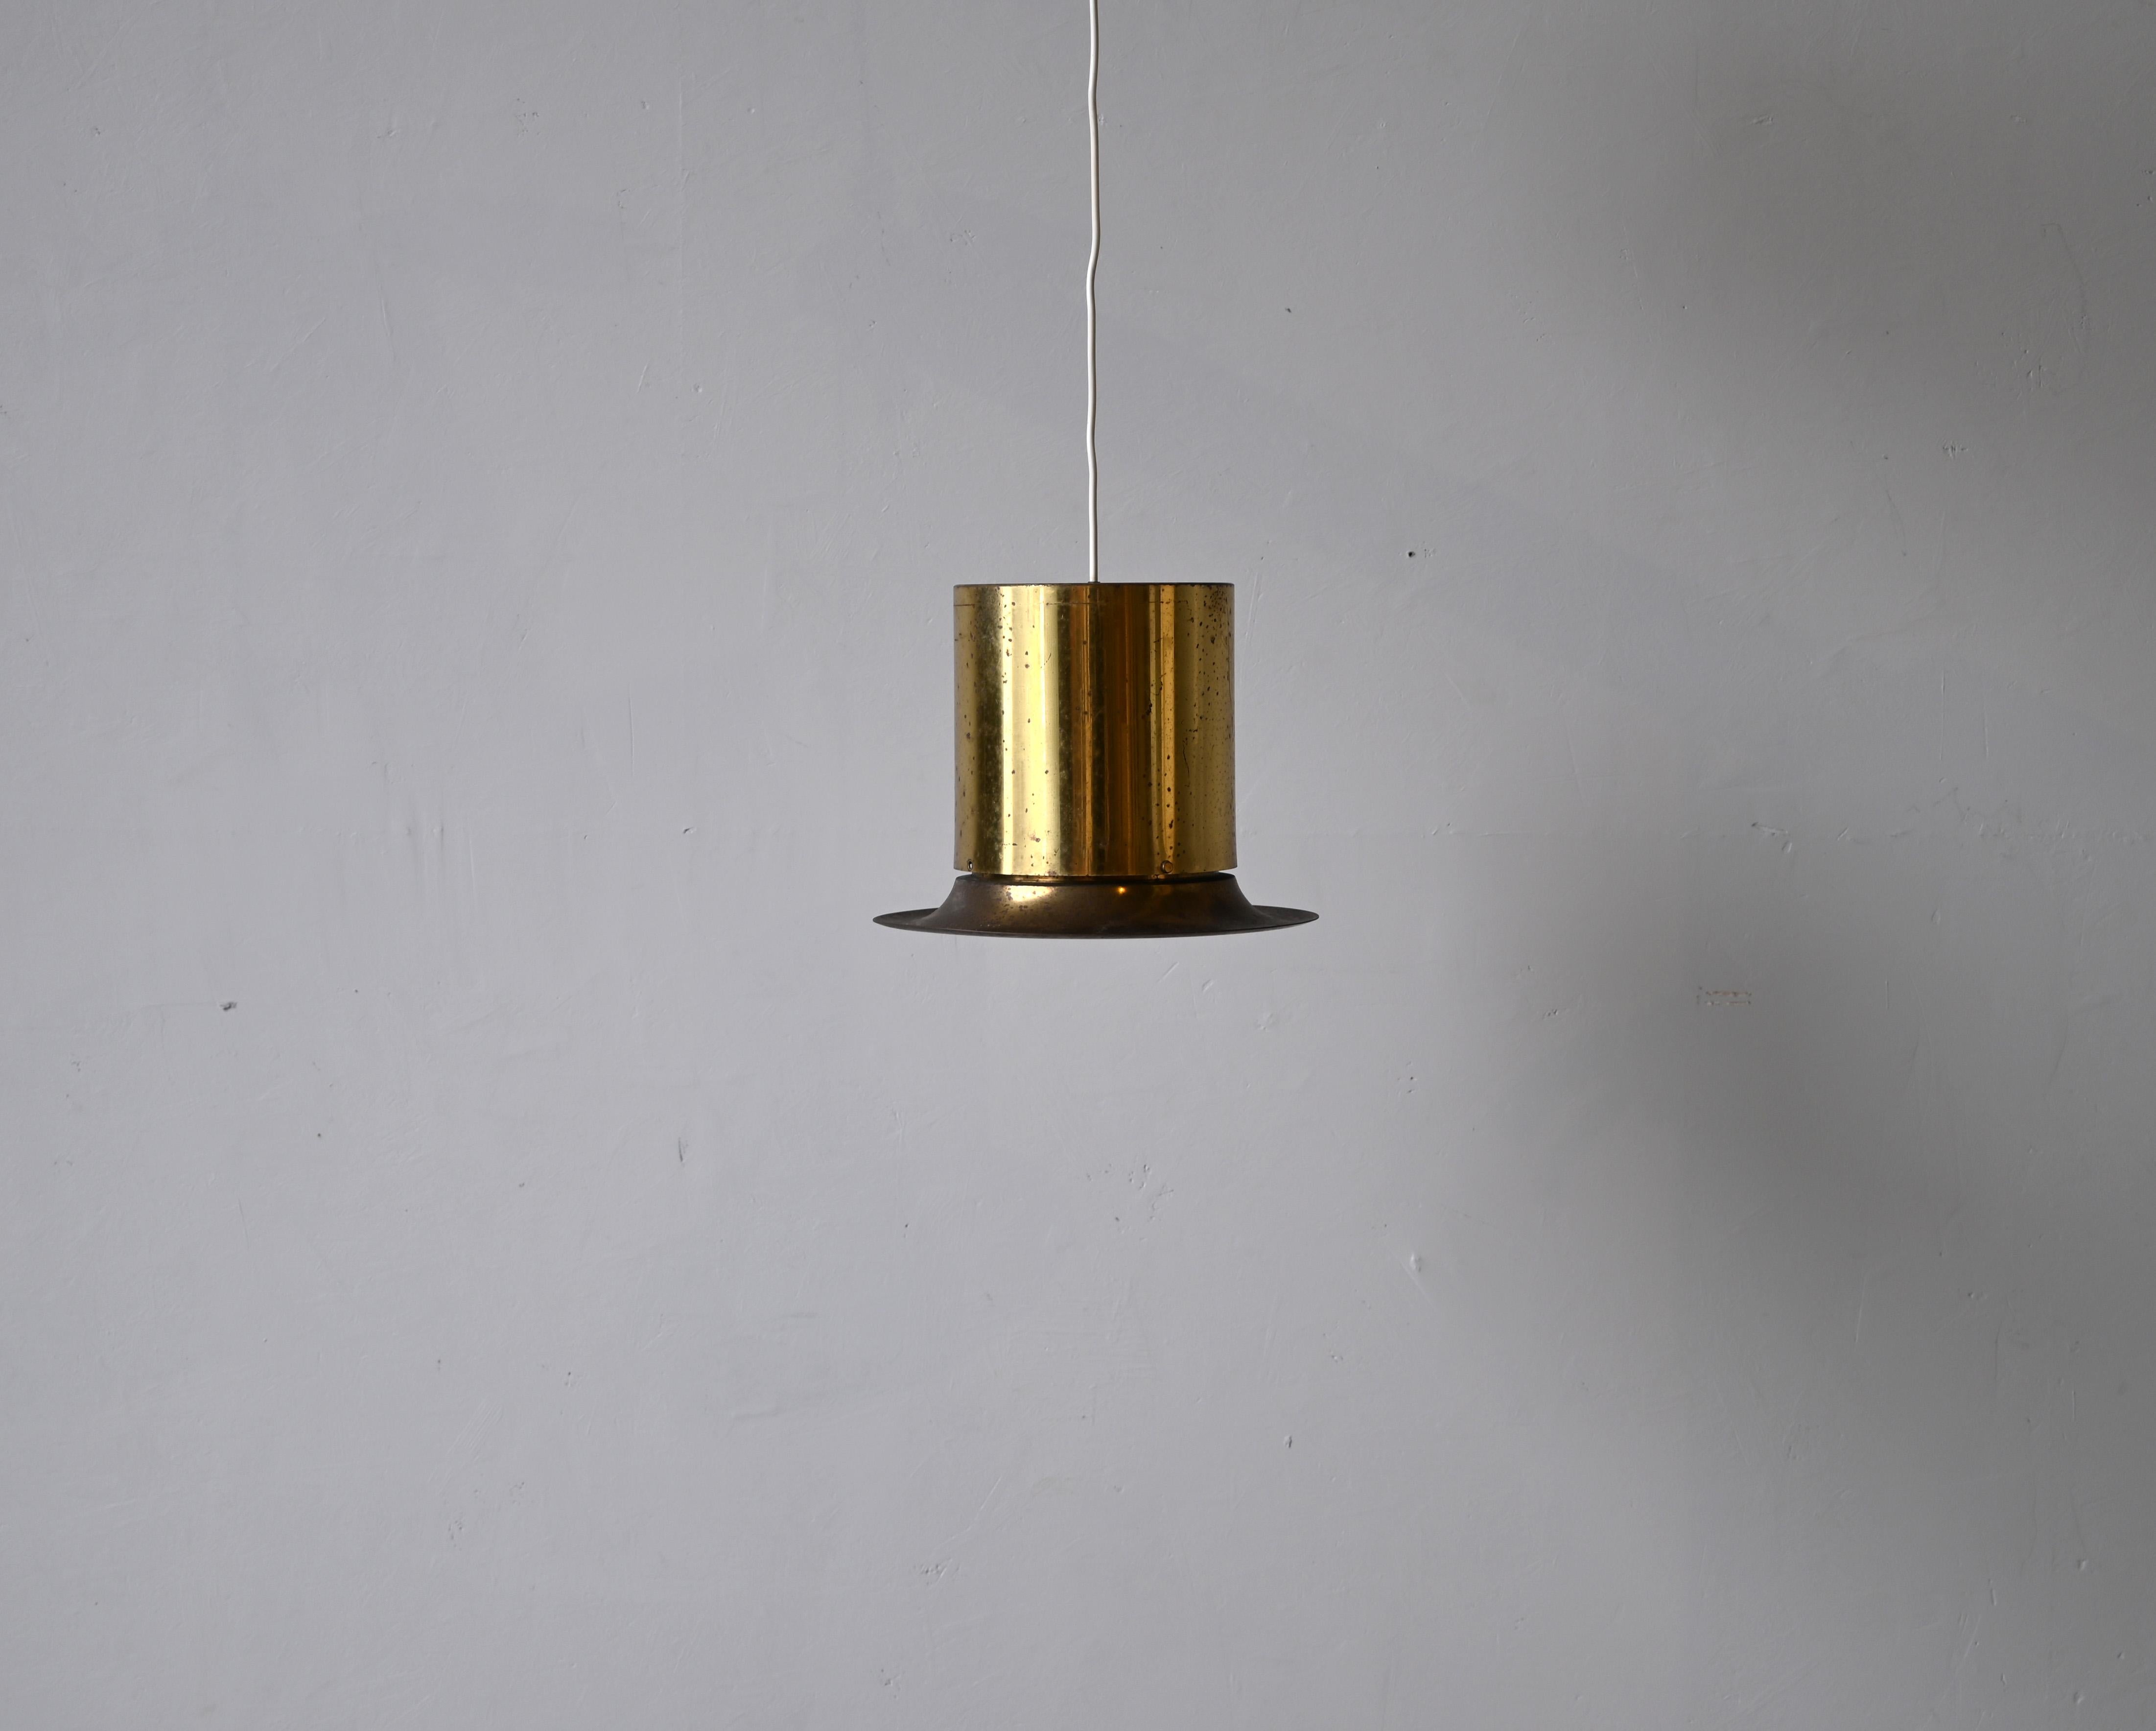 A pendant light, designed by Hans-Agne Jakobsson for his own firm in Markaryd, Sweden. c. 1960s. Labeled.